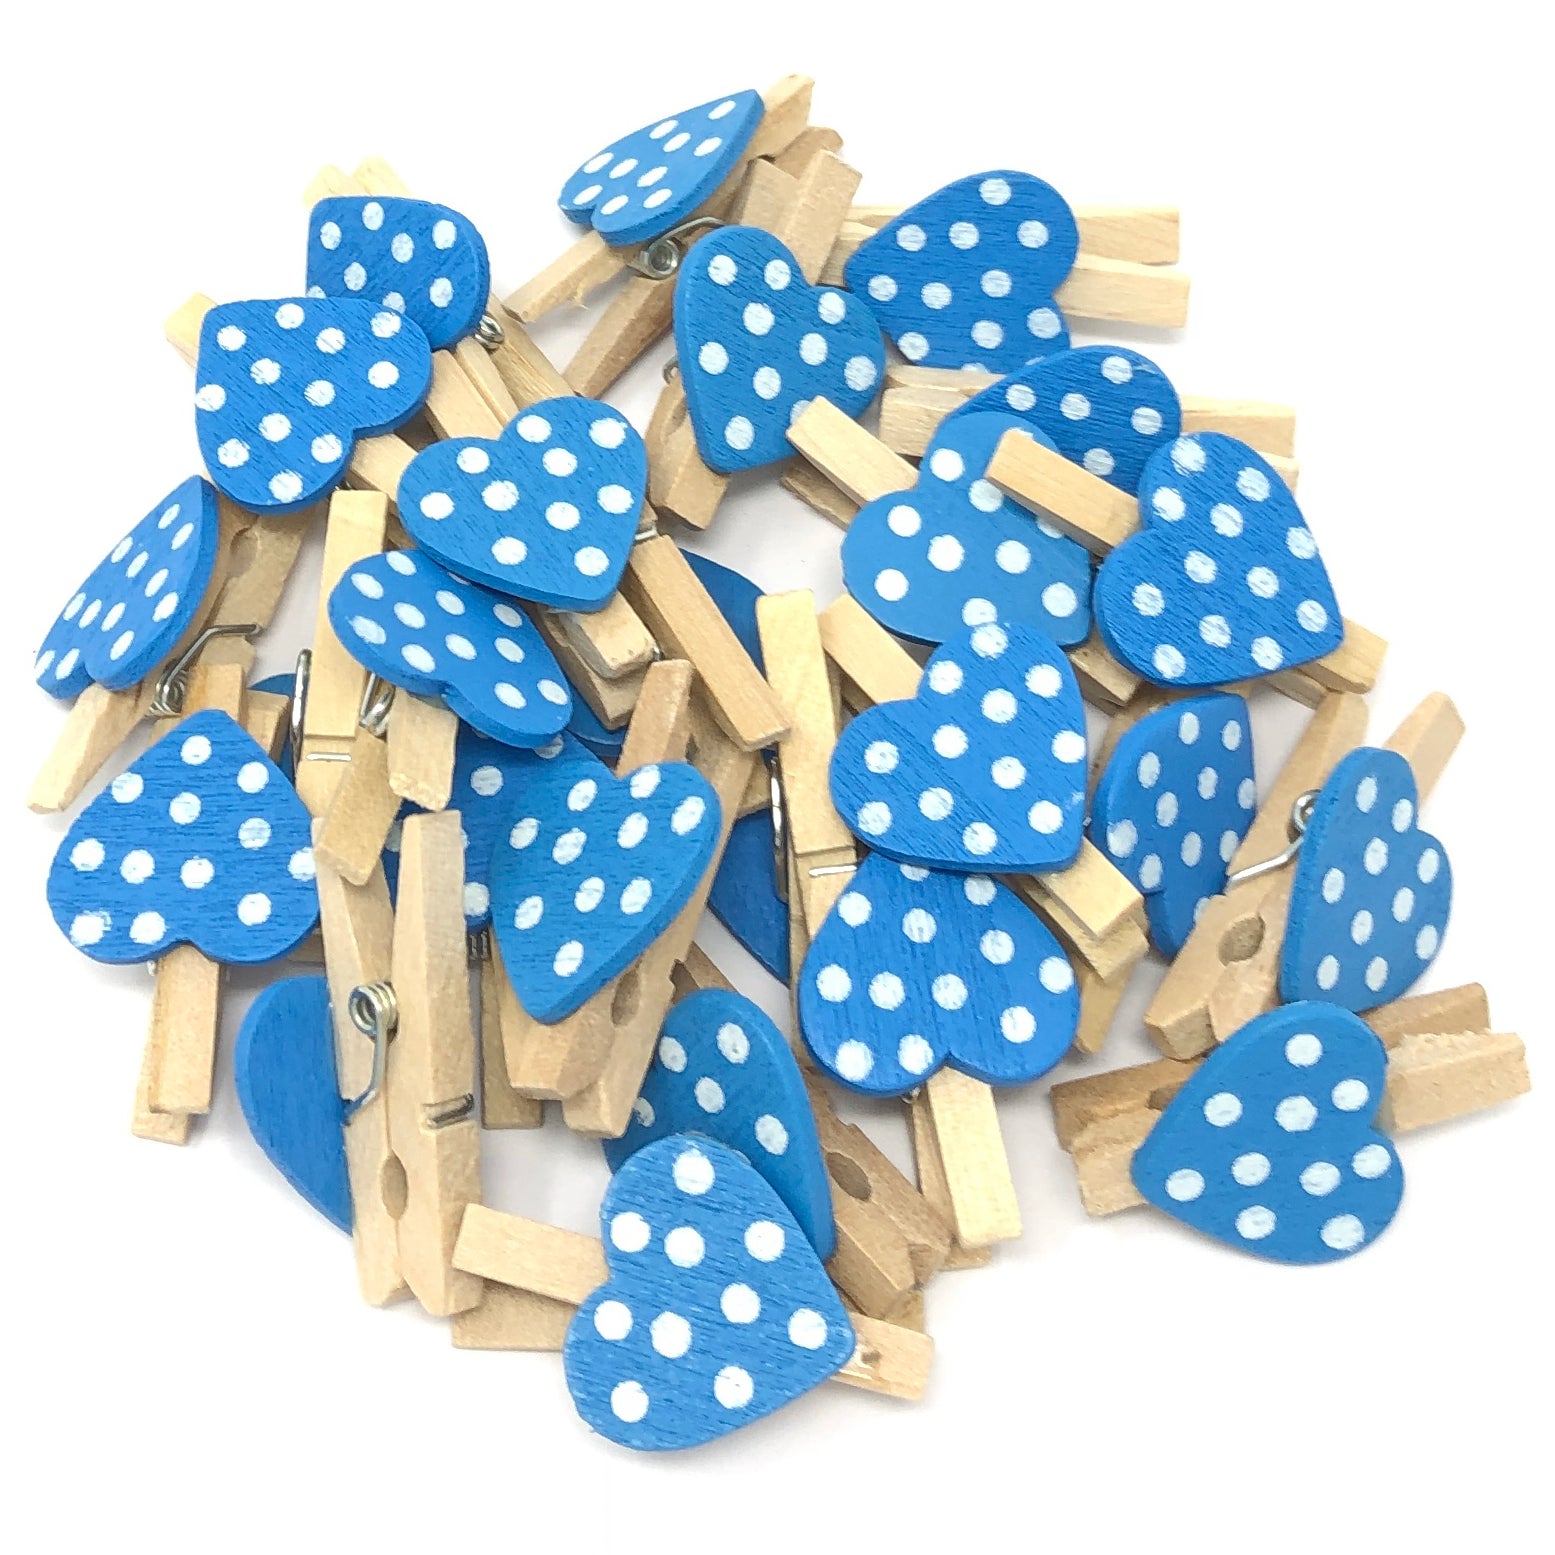 Blue 30mm Natural Pegs with 18mm Spotty Hearts